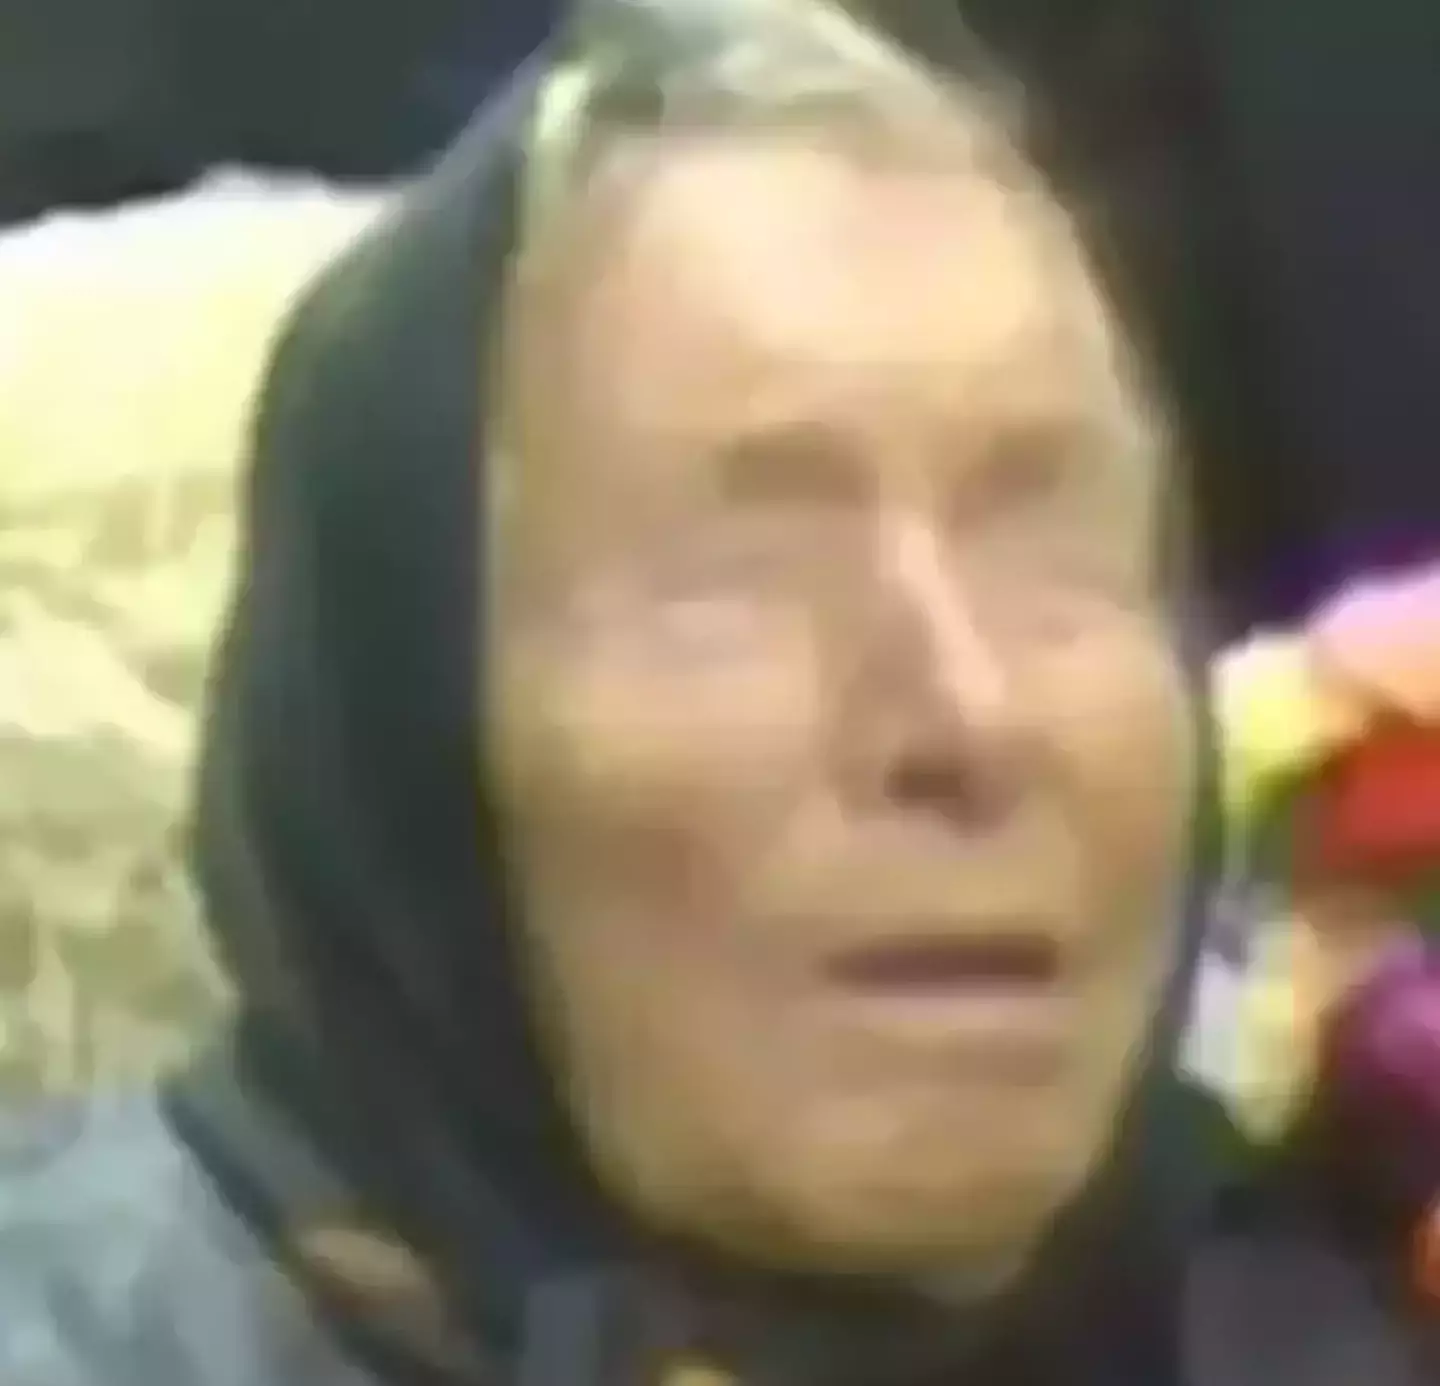 Baba Vanga is one of the most notable figures to have built a notorious reputation for predictions.